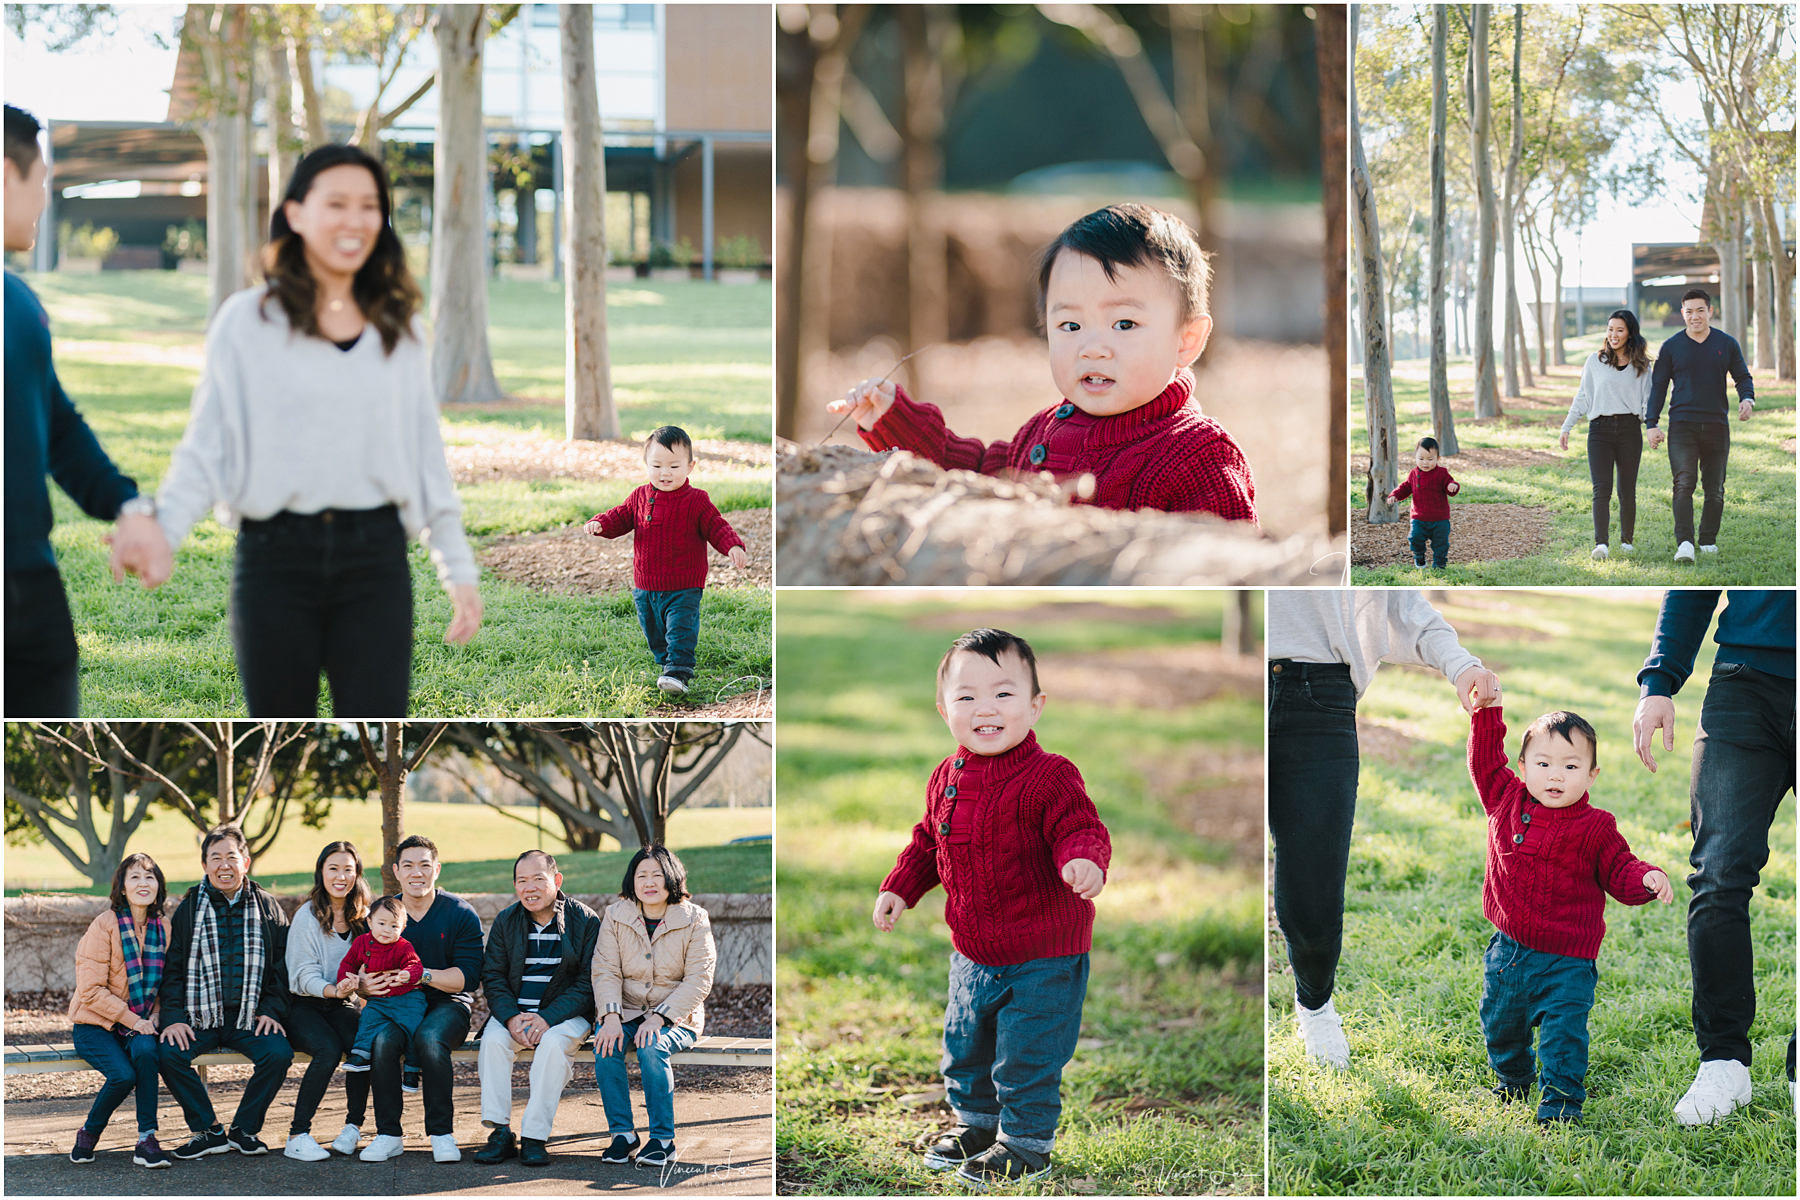 Winter Family Session at Bicentennial Park